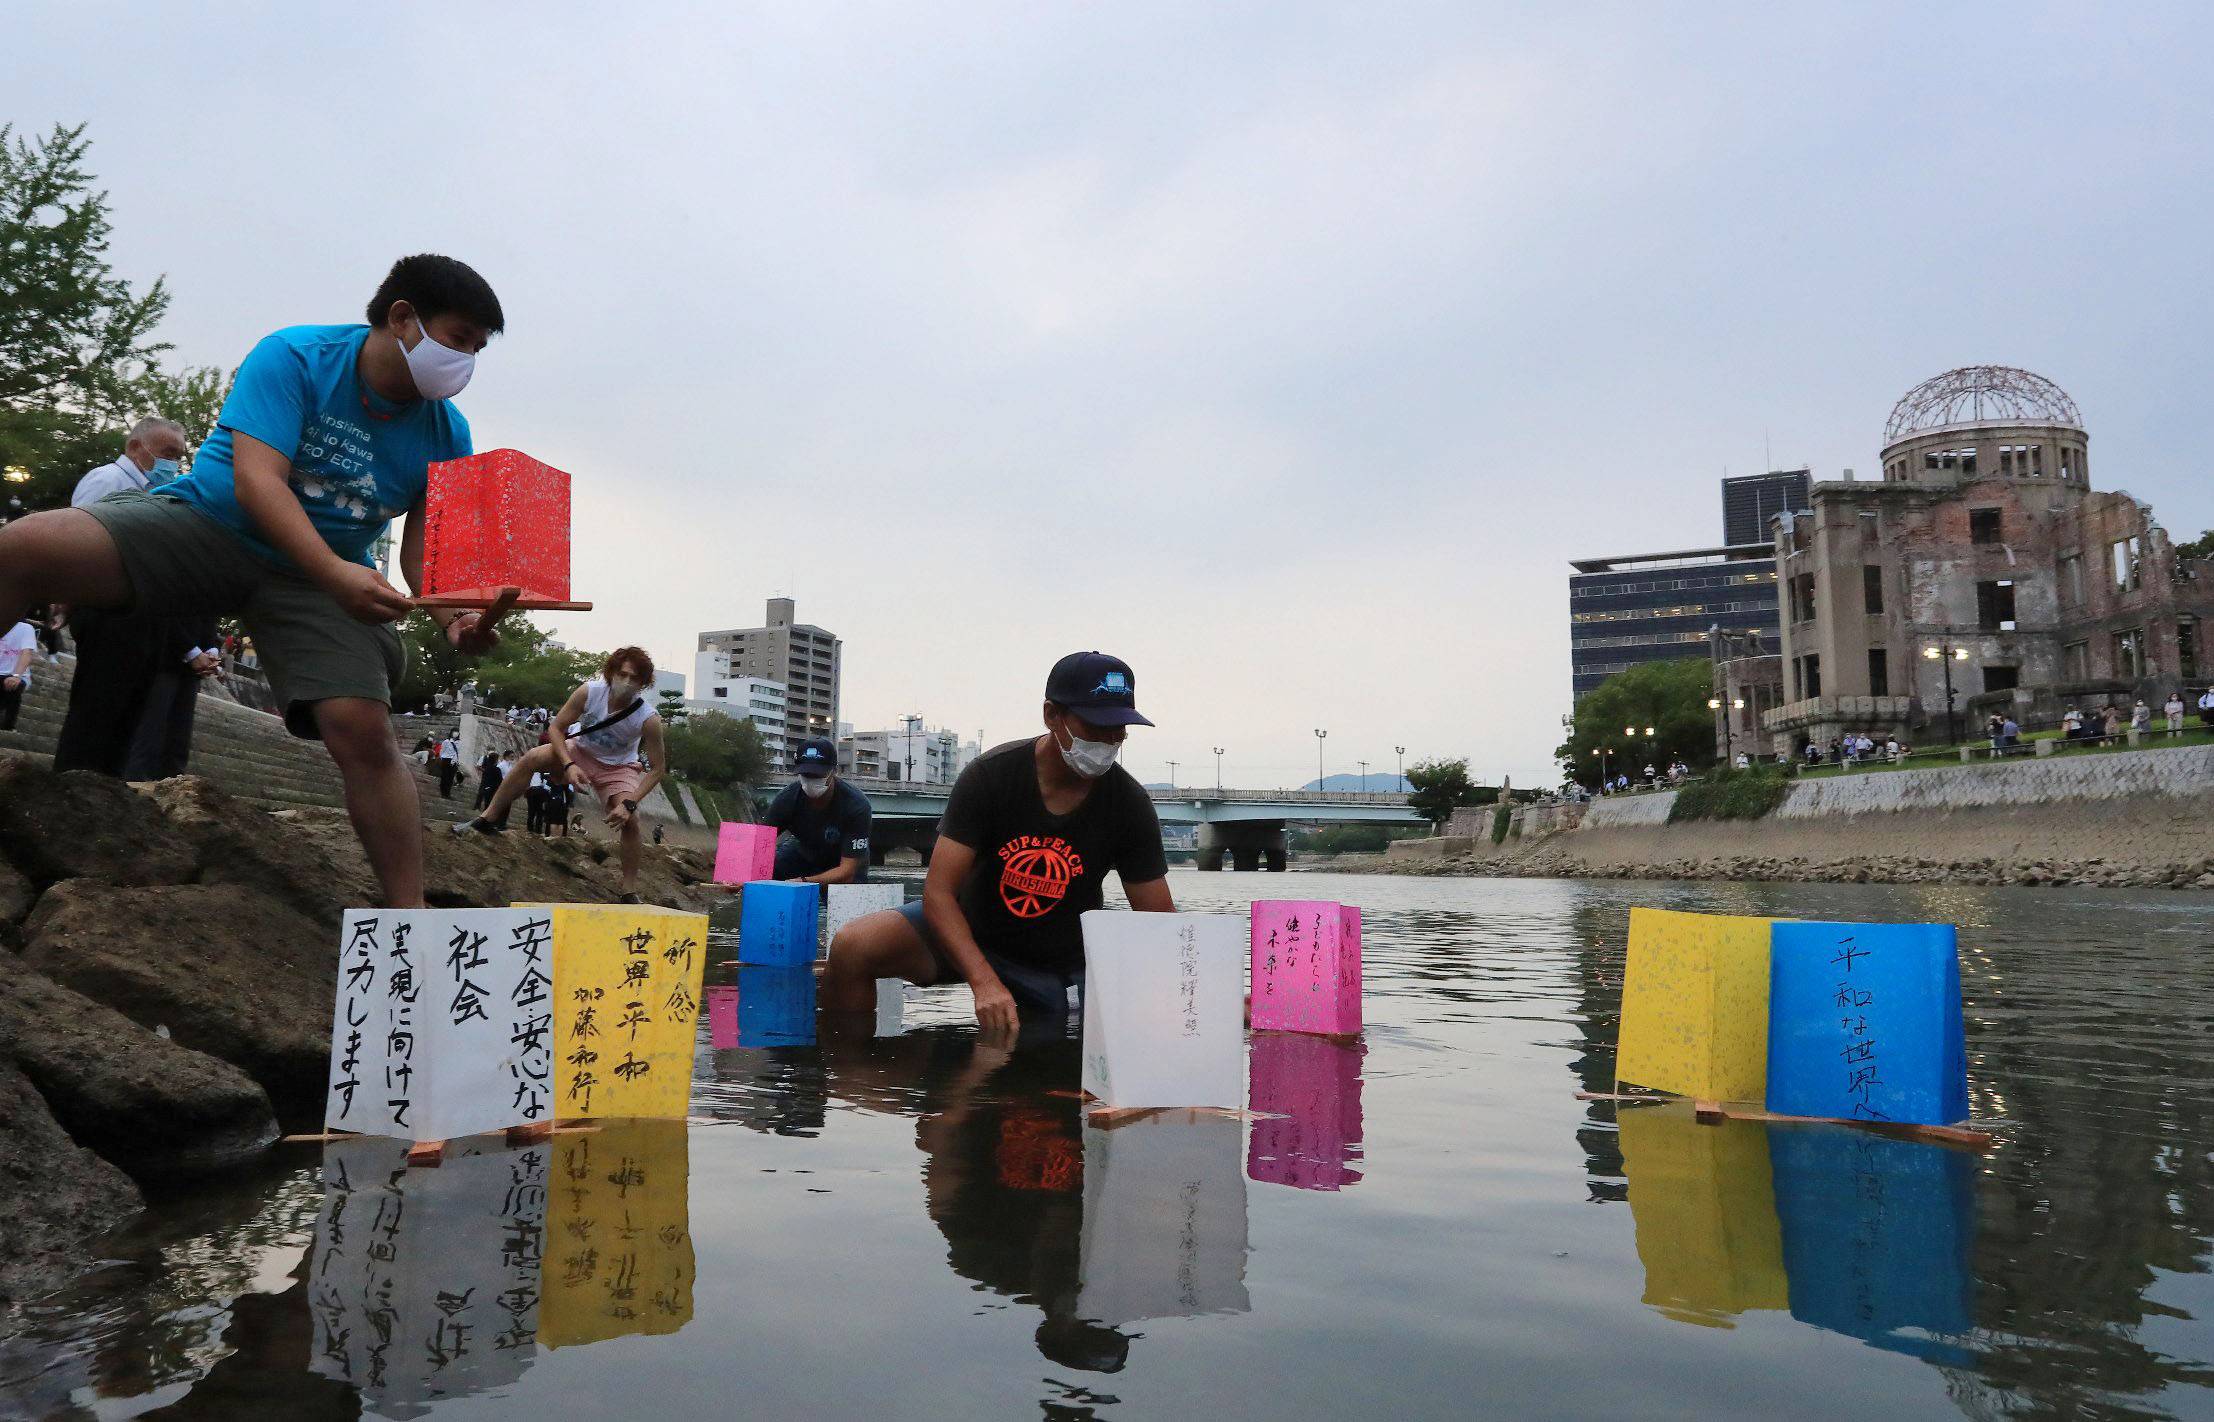 People mark the 75th anniversary of the atomic bombing of Hiroshima on Aug. 6, 2020, by releasing paper lanterns on the Motoyasu River facing the Atomic Bomb Dome. | POOL / VIA KYODO